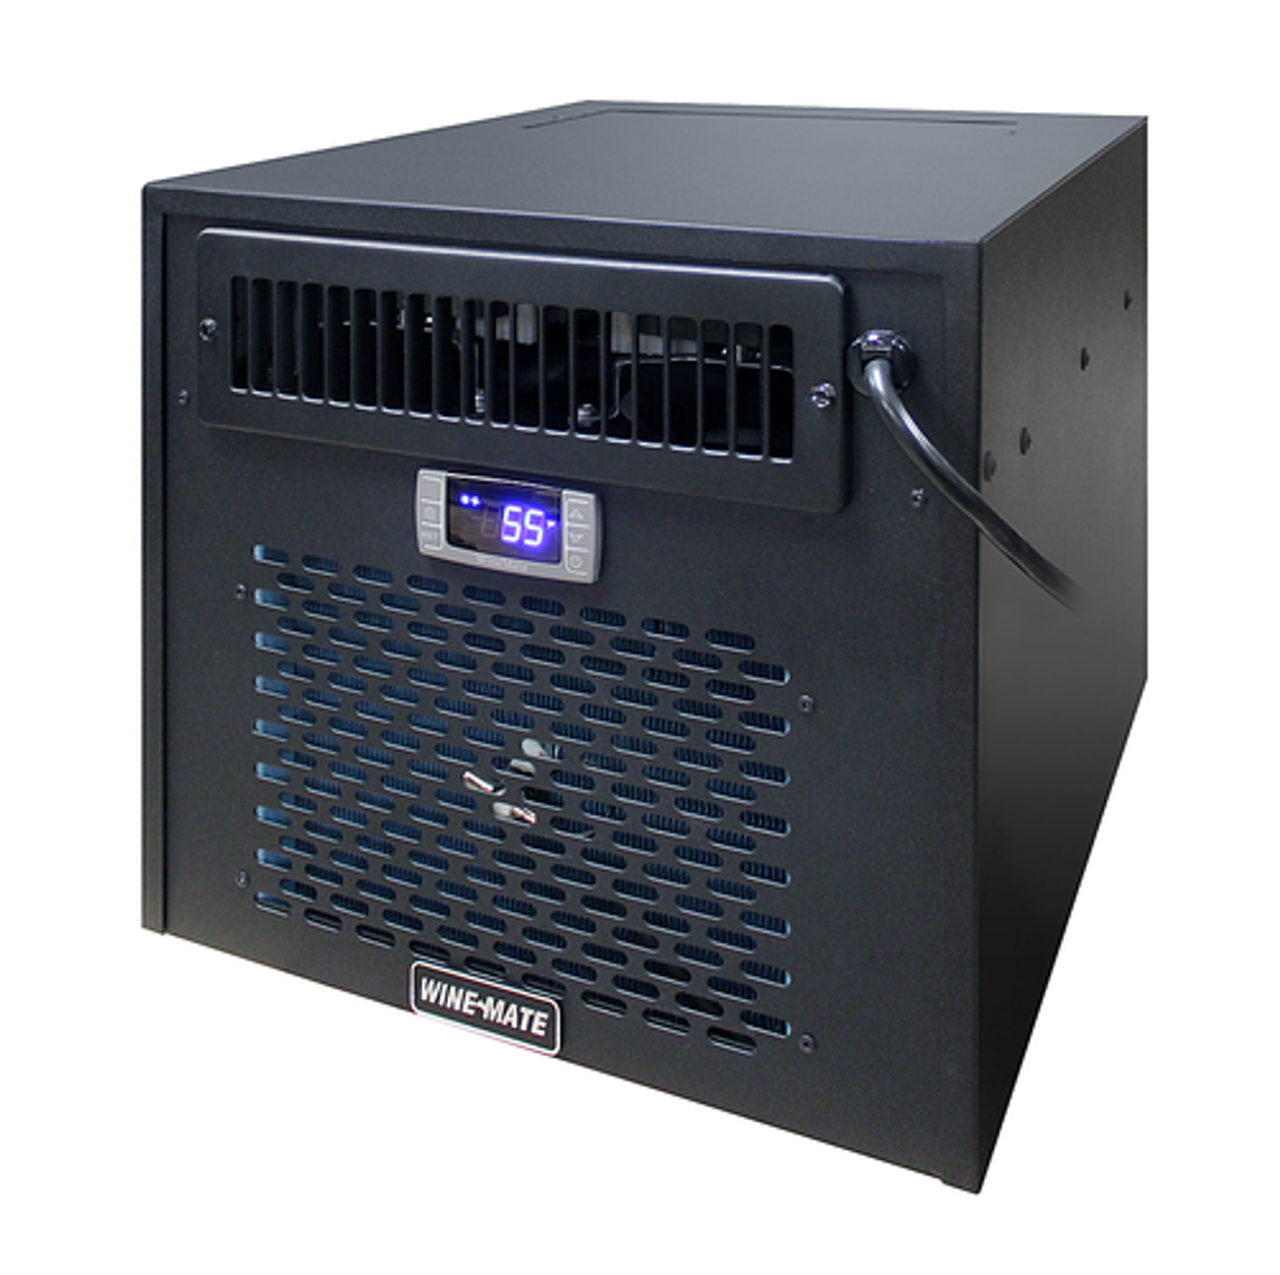 Vinotemp - Wine-Mate 2500HZD Self-Contained Cellar Cooling System